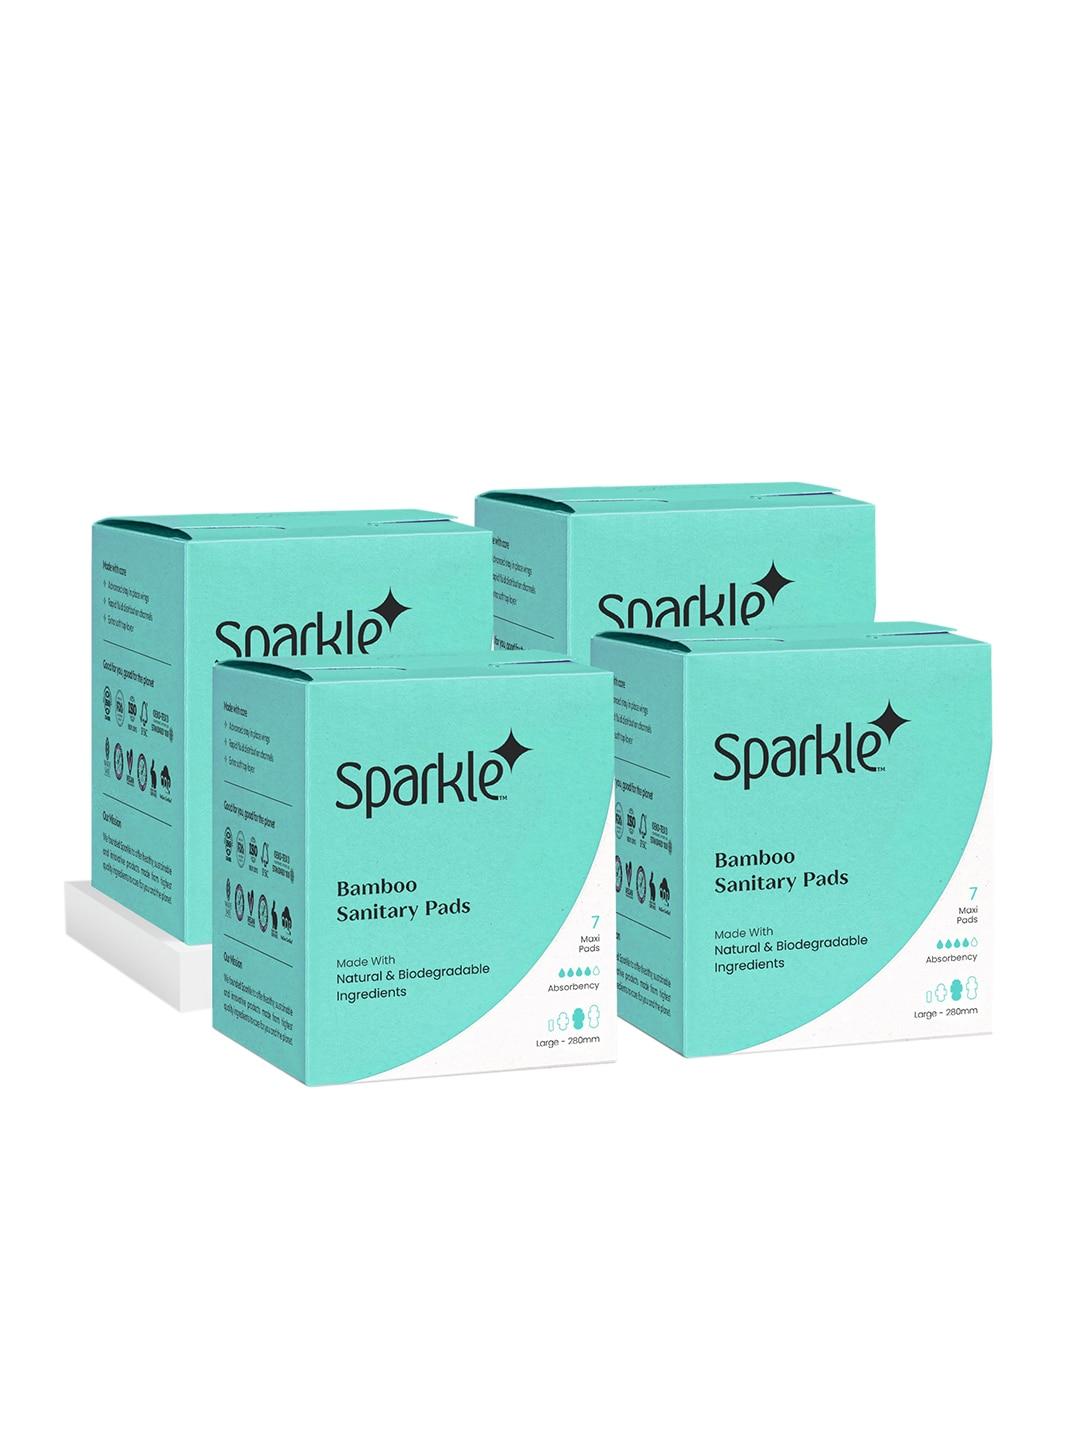 Sparkle Set of 4 Cruelty-Free & Vegan Large Bamboo Sanitary Pads - 7 Maxi Pads Each